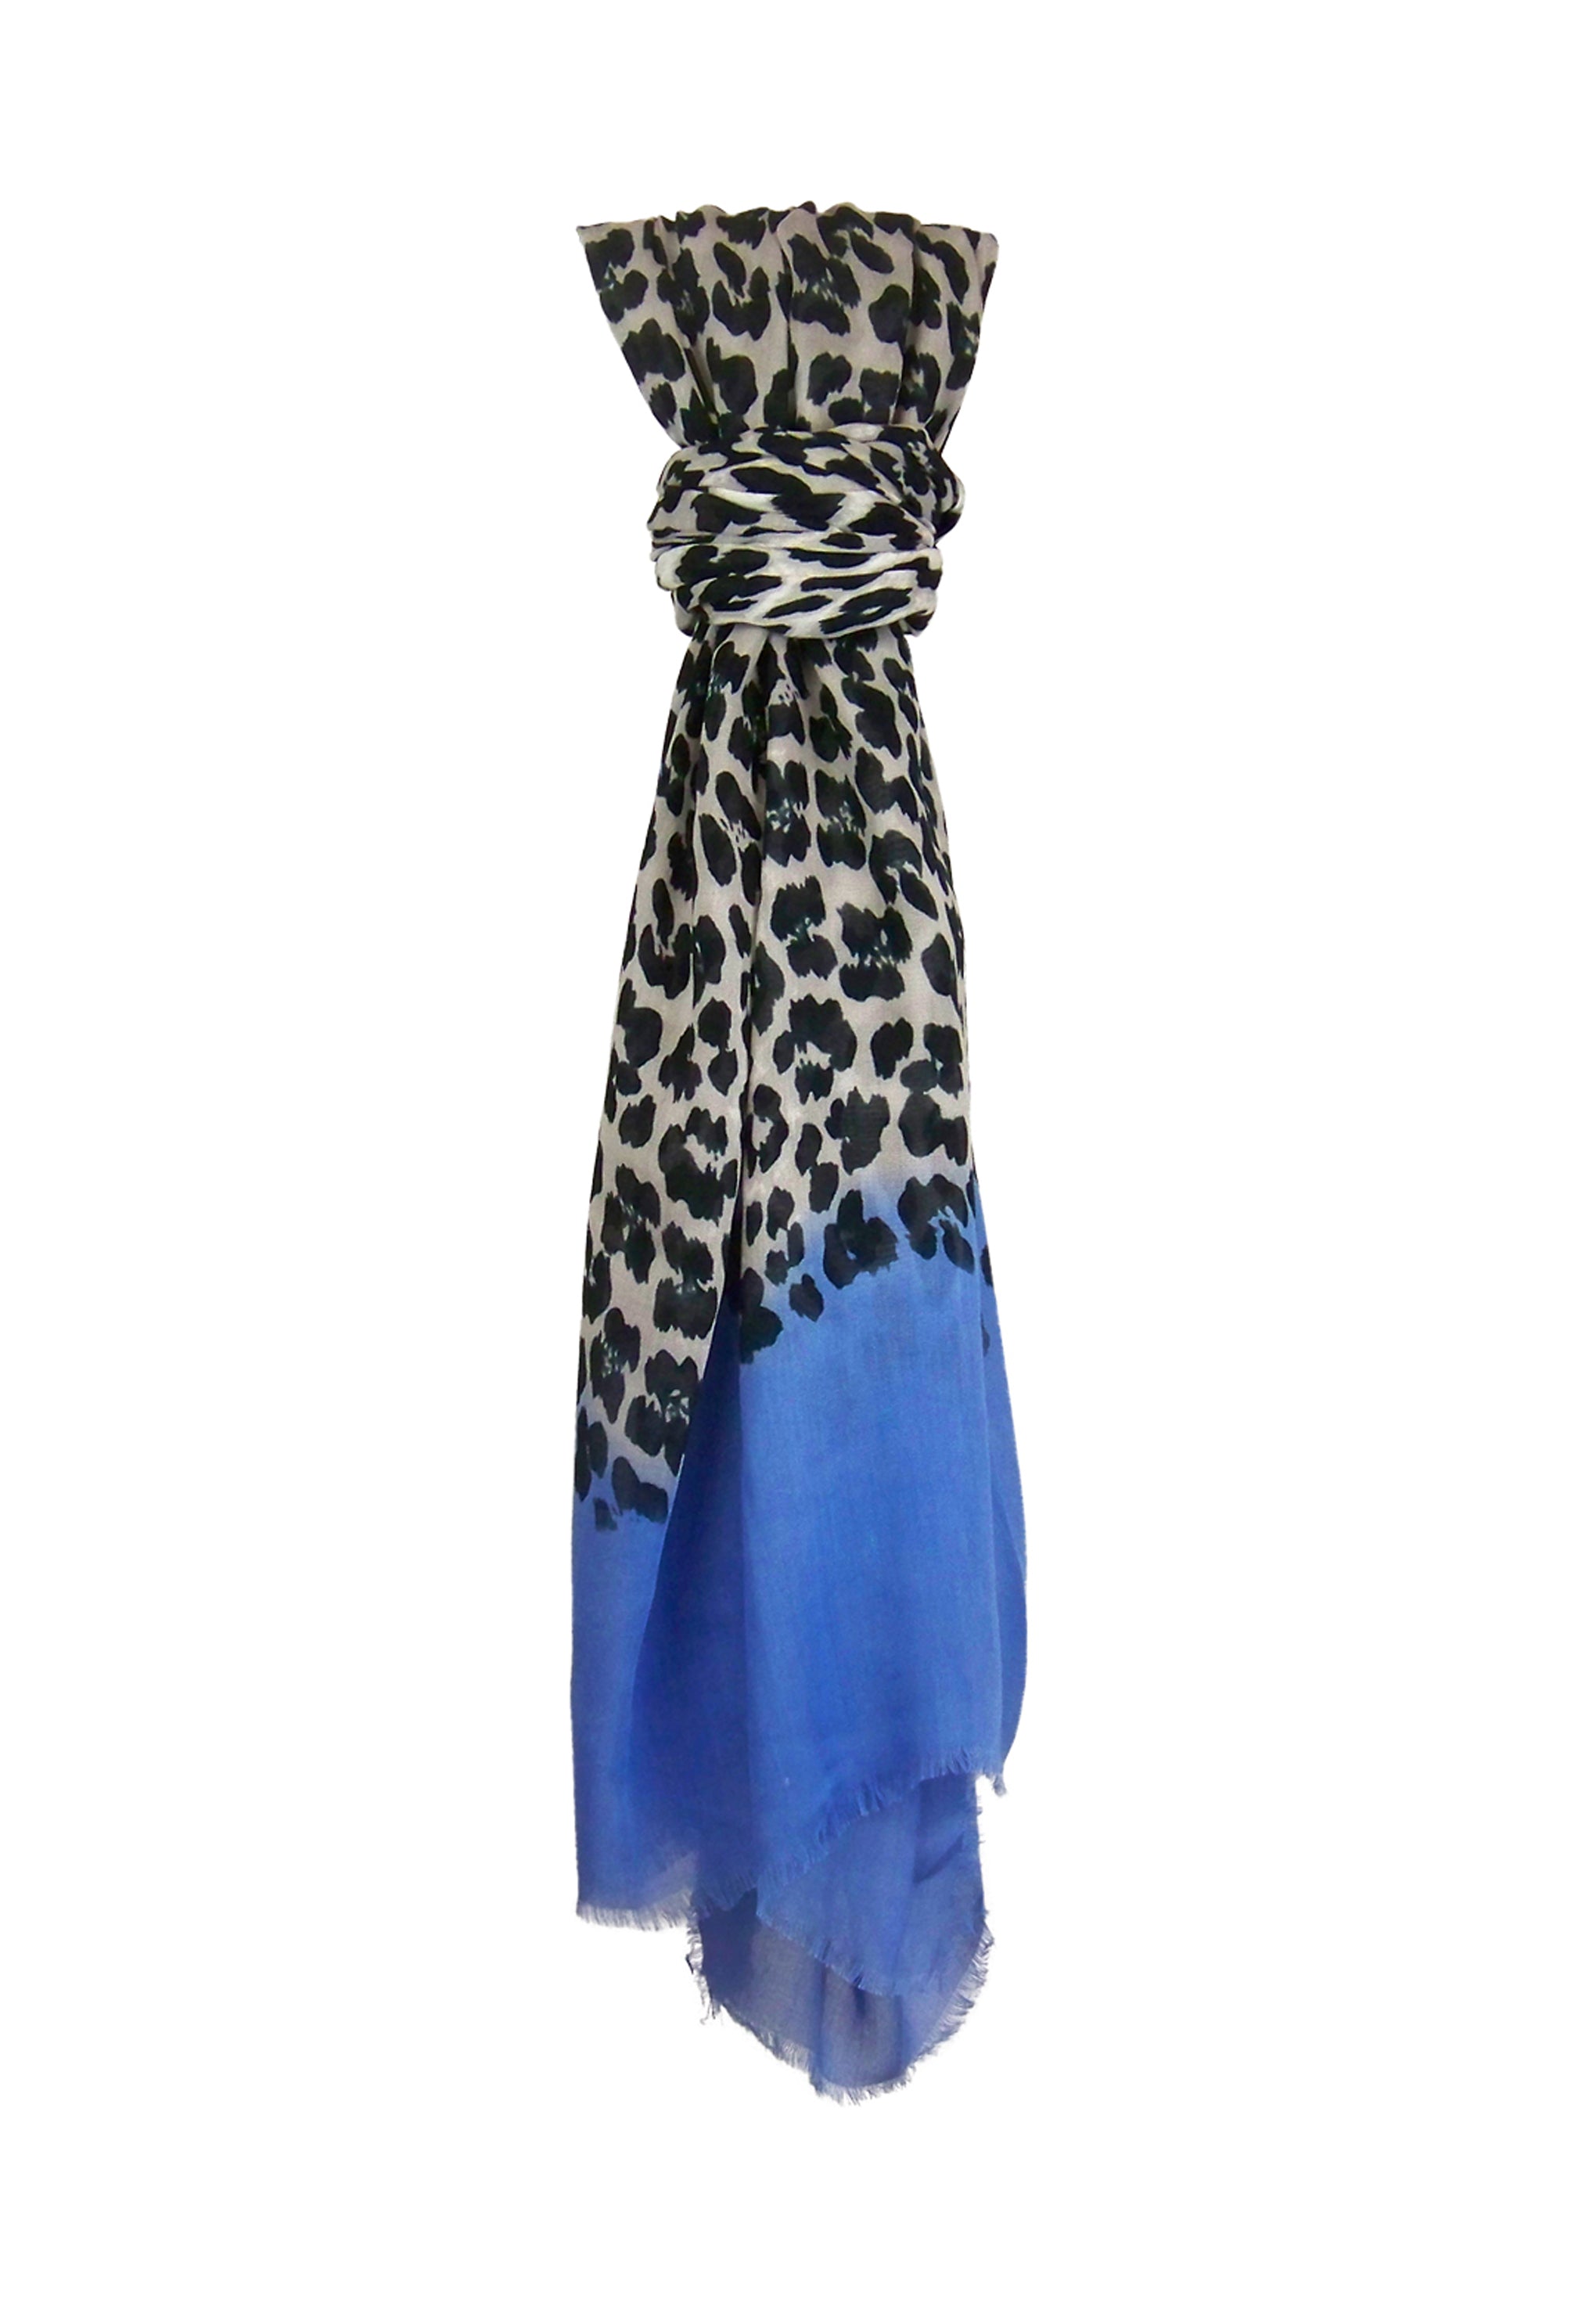 Blue Pacific Animal Print Cashmere Silk Scarf in Denim and Snow 78 x 22